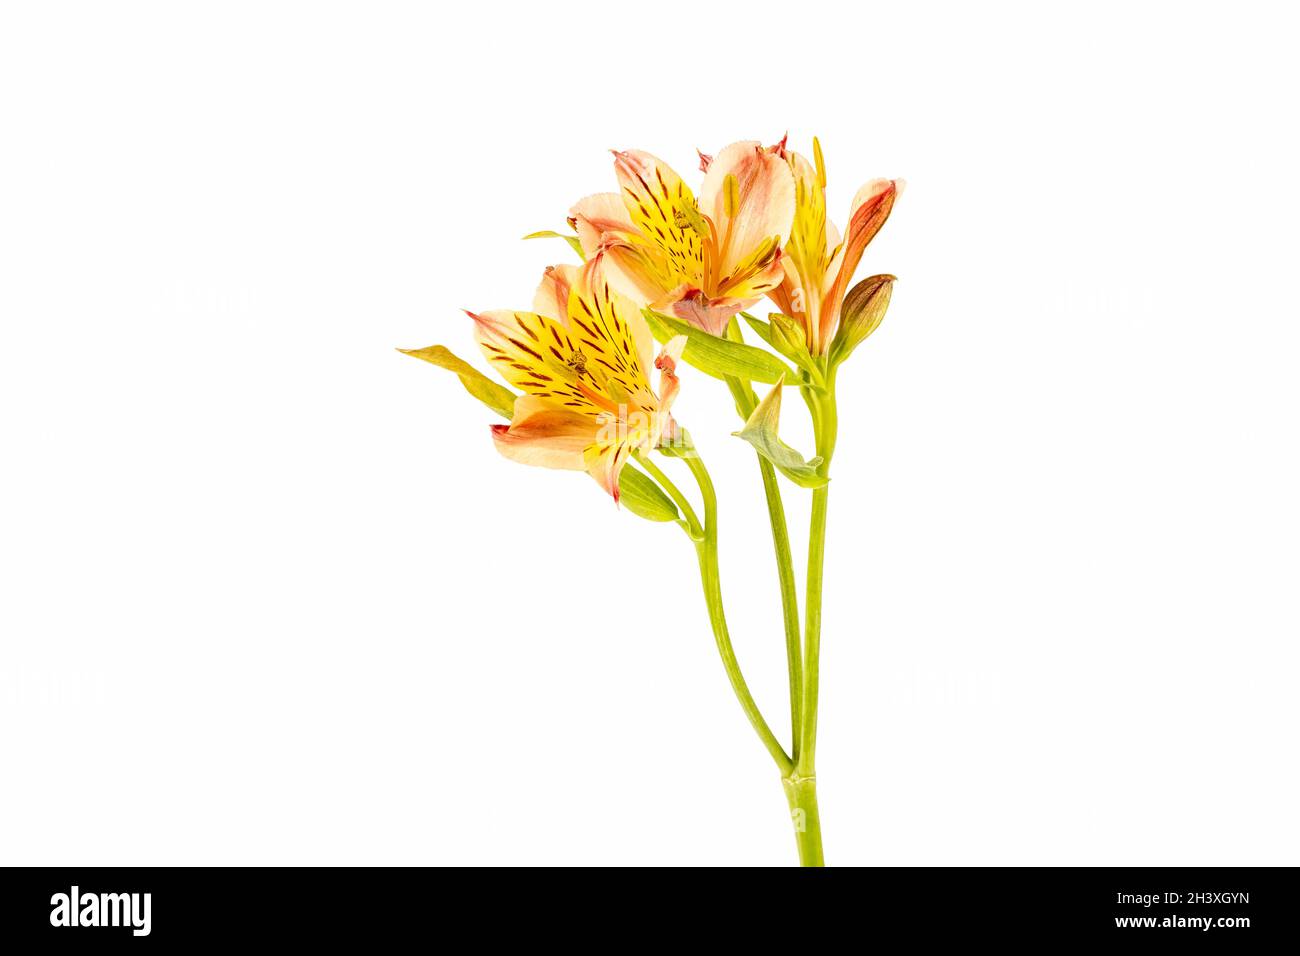 L'Alstroemeria flower isolated Banque D'Images